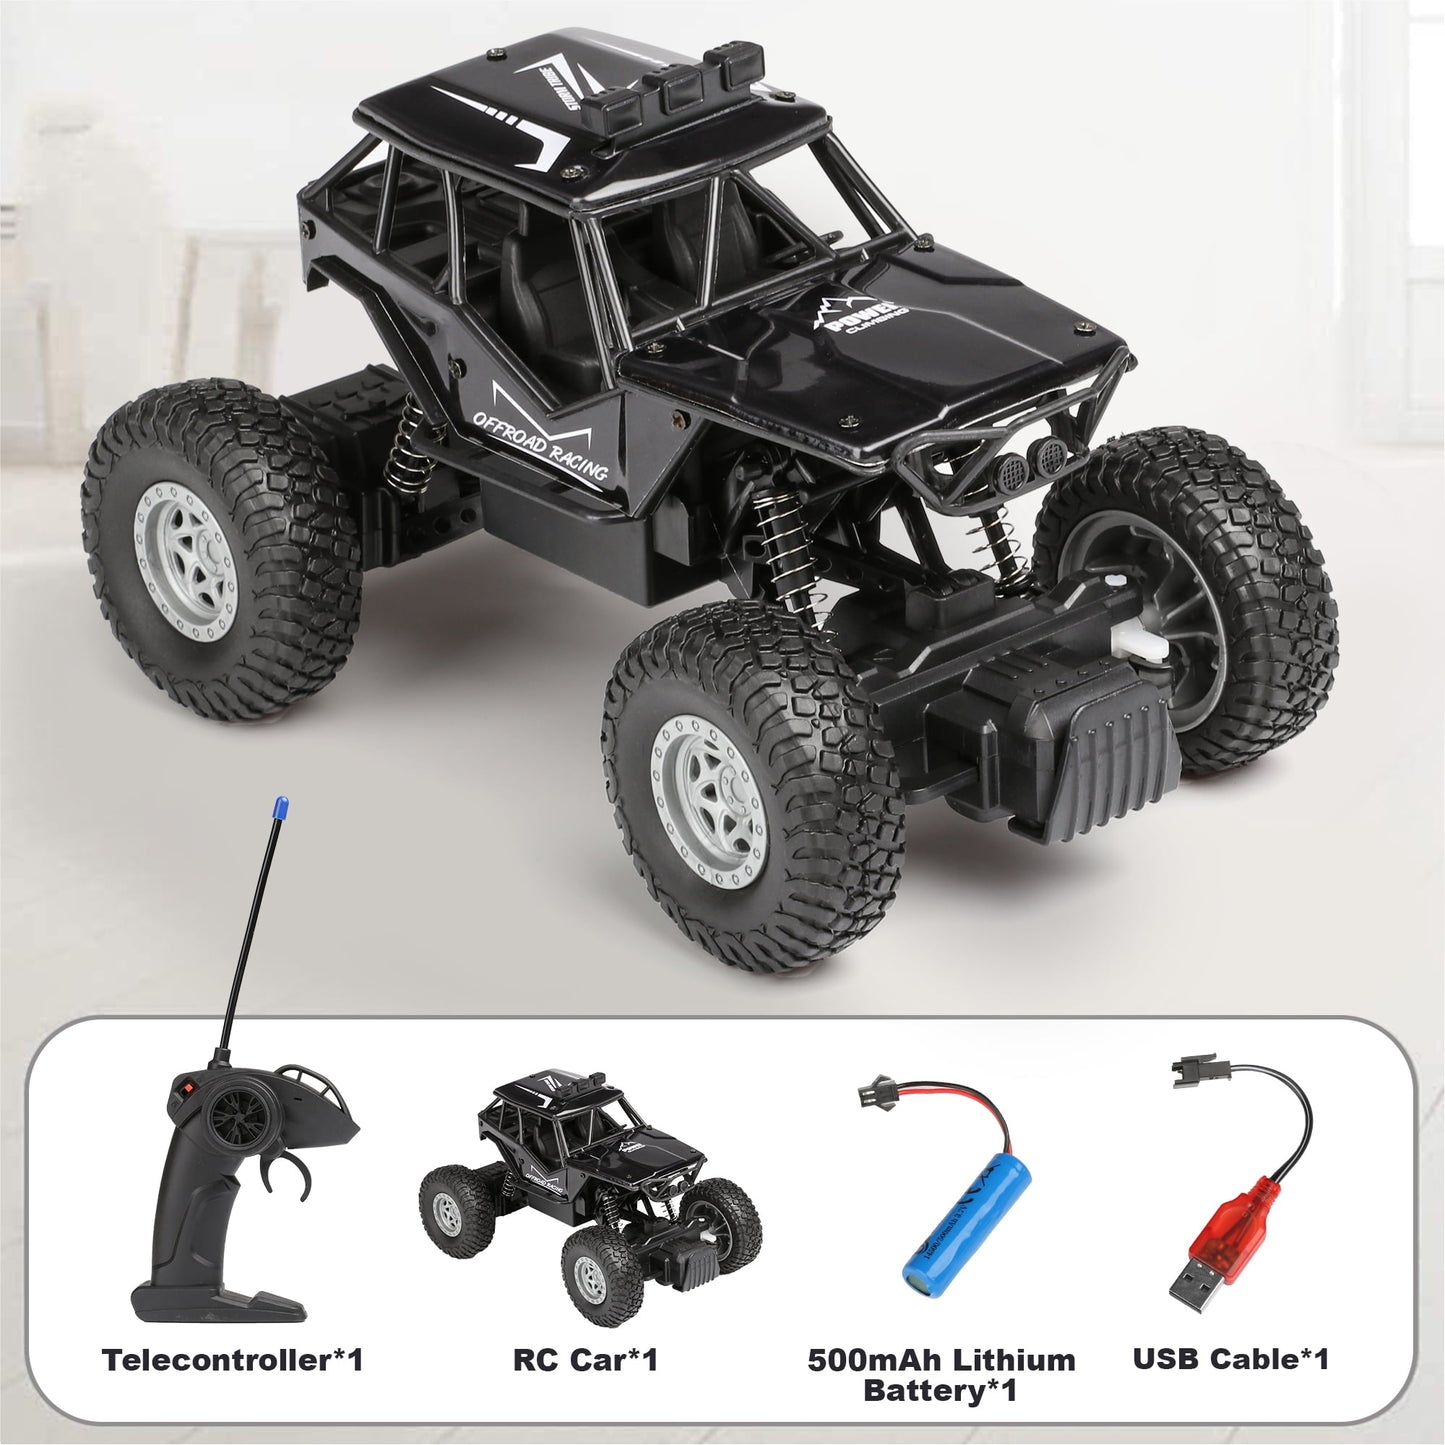 Remote Control Cars 1/18 Scale, Race Car Toys for Boys Kids 6-12 Years Old, High Speed 20-40KM/H Electric All Terrain Off-Road Monster Truck.（Black）